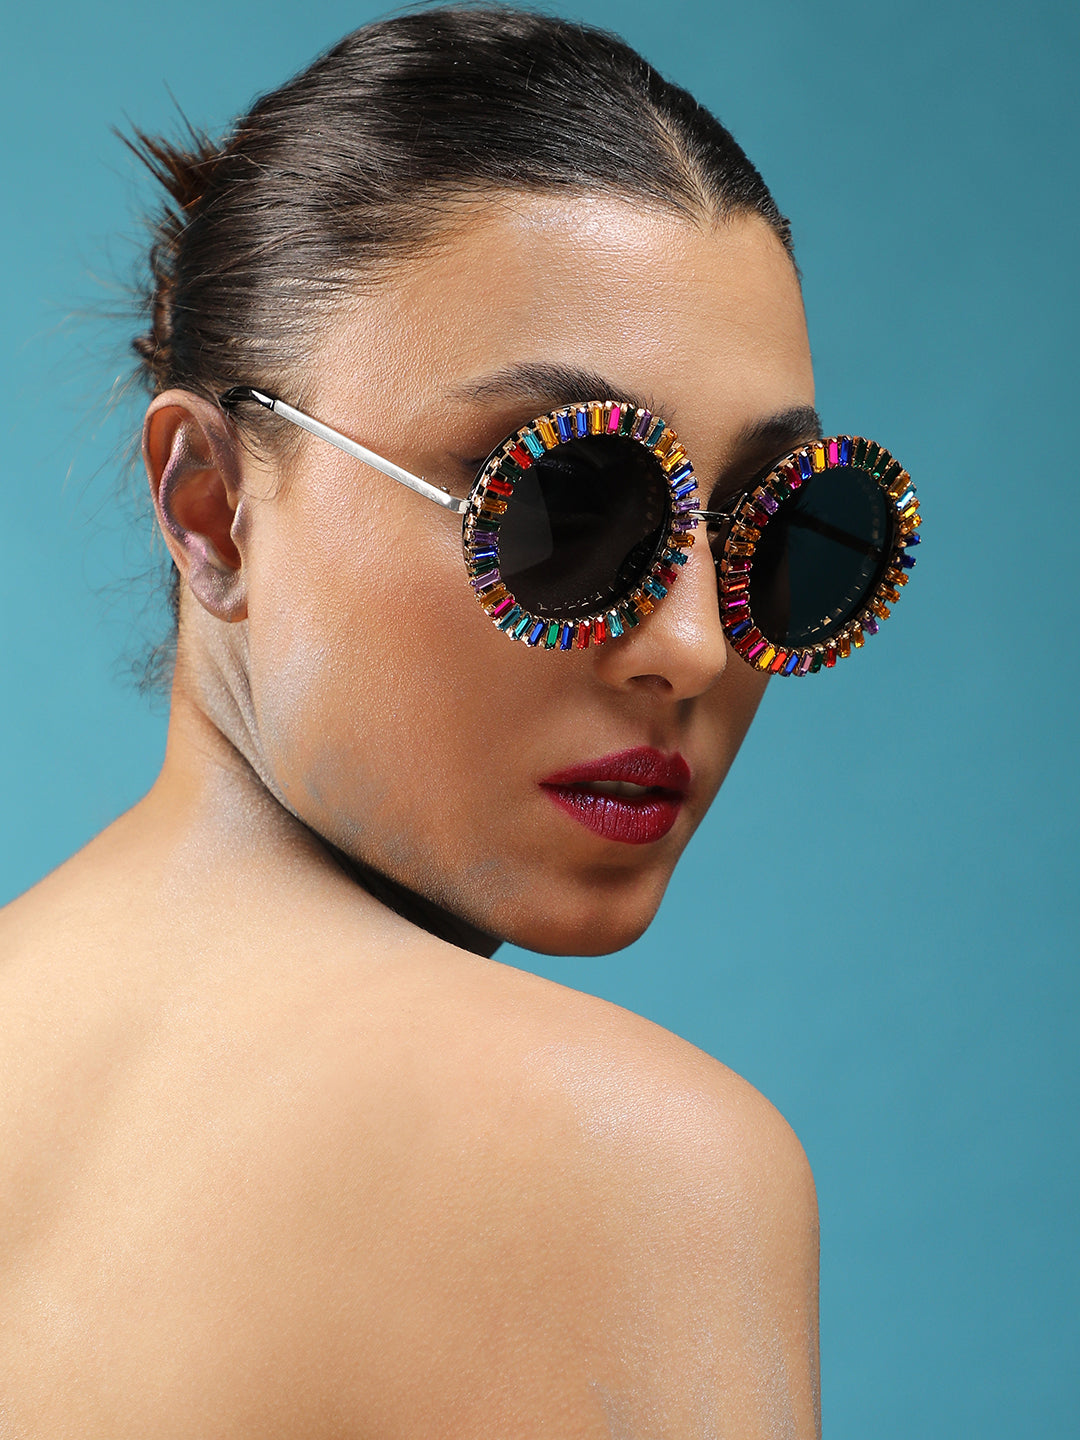 Sunglasses With Flair: Embrace The Bling